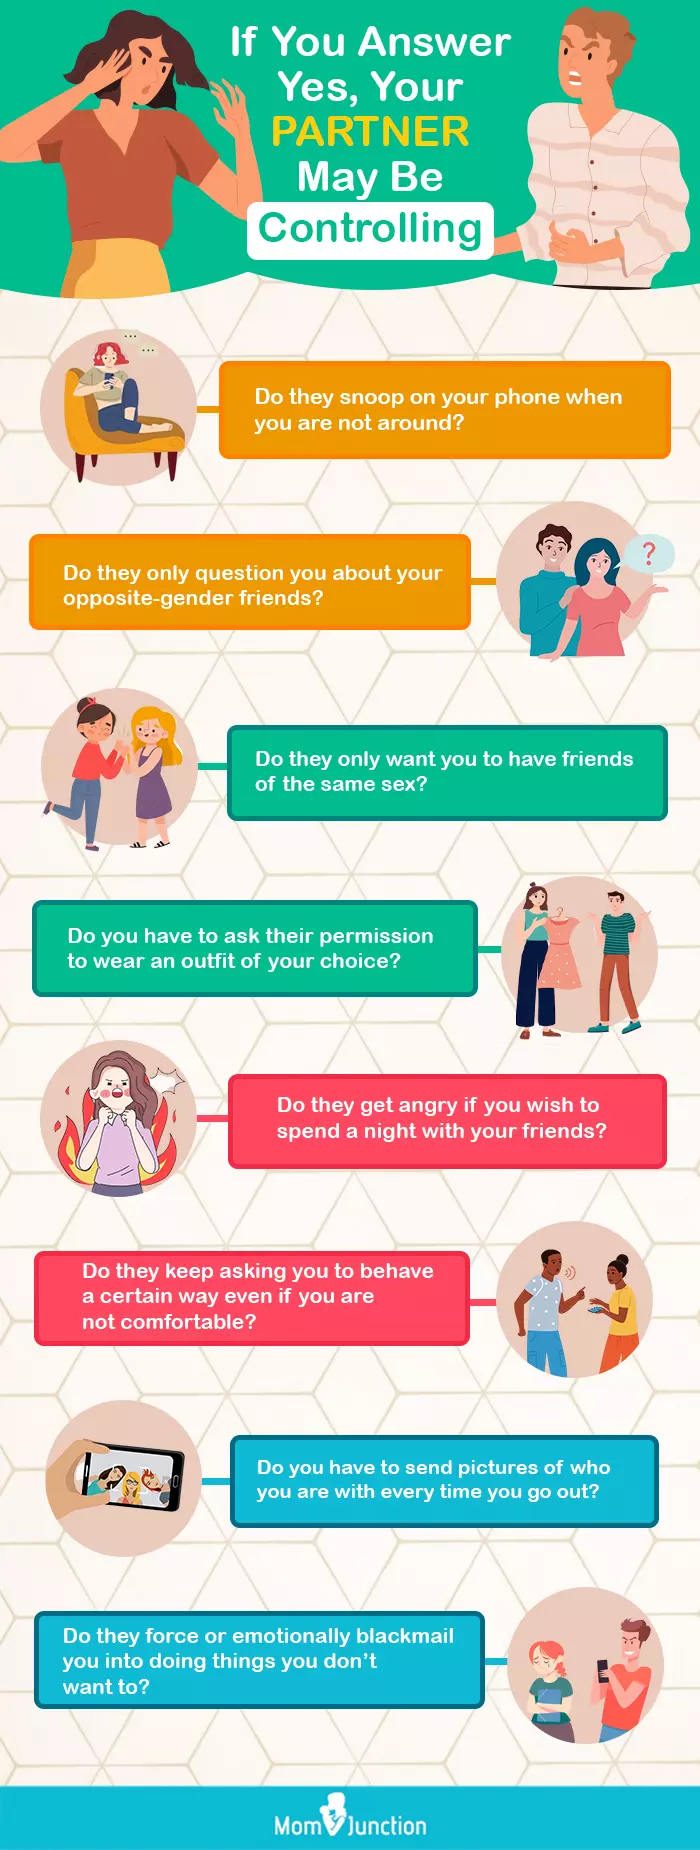 your partner may be controlling (infographic)